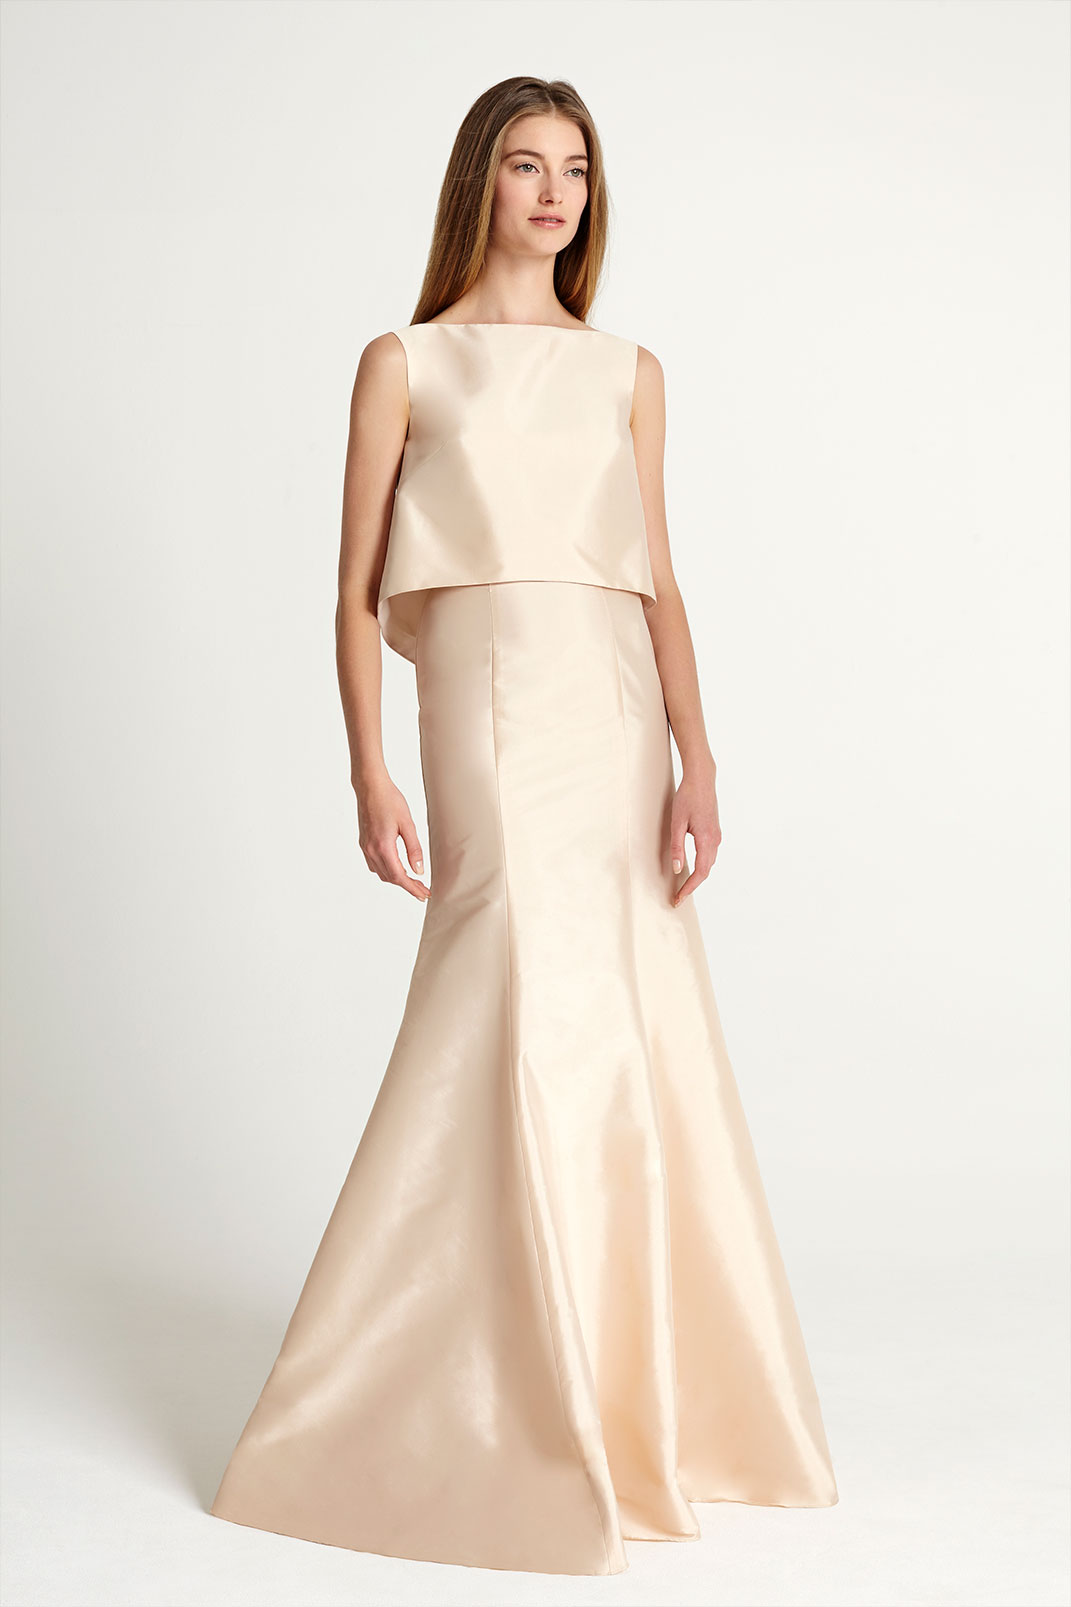 Glamour girls: bridesmaid gowns